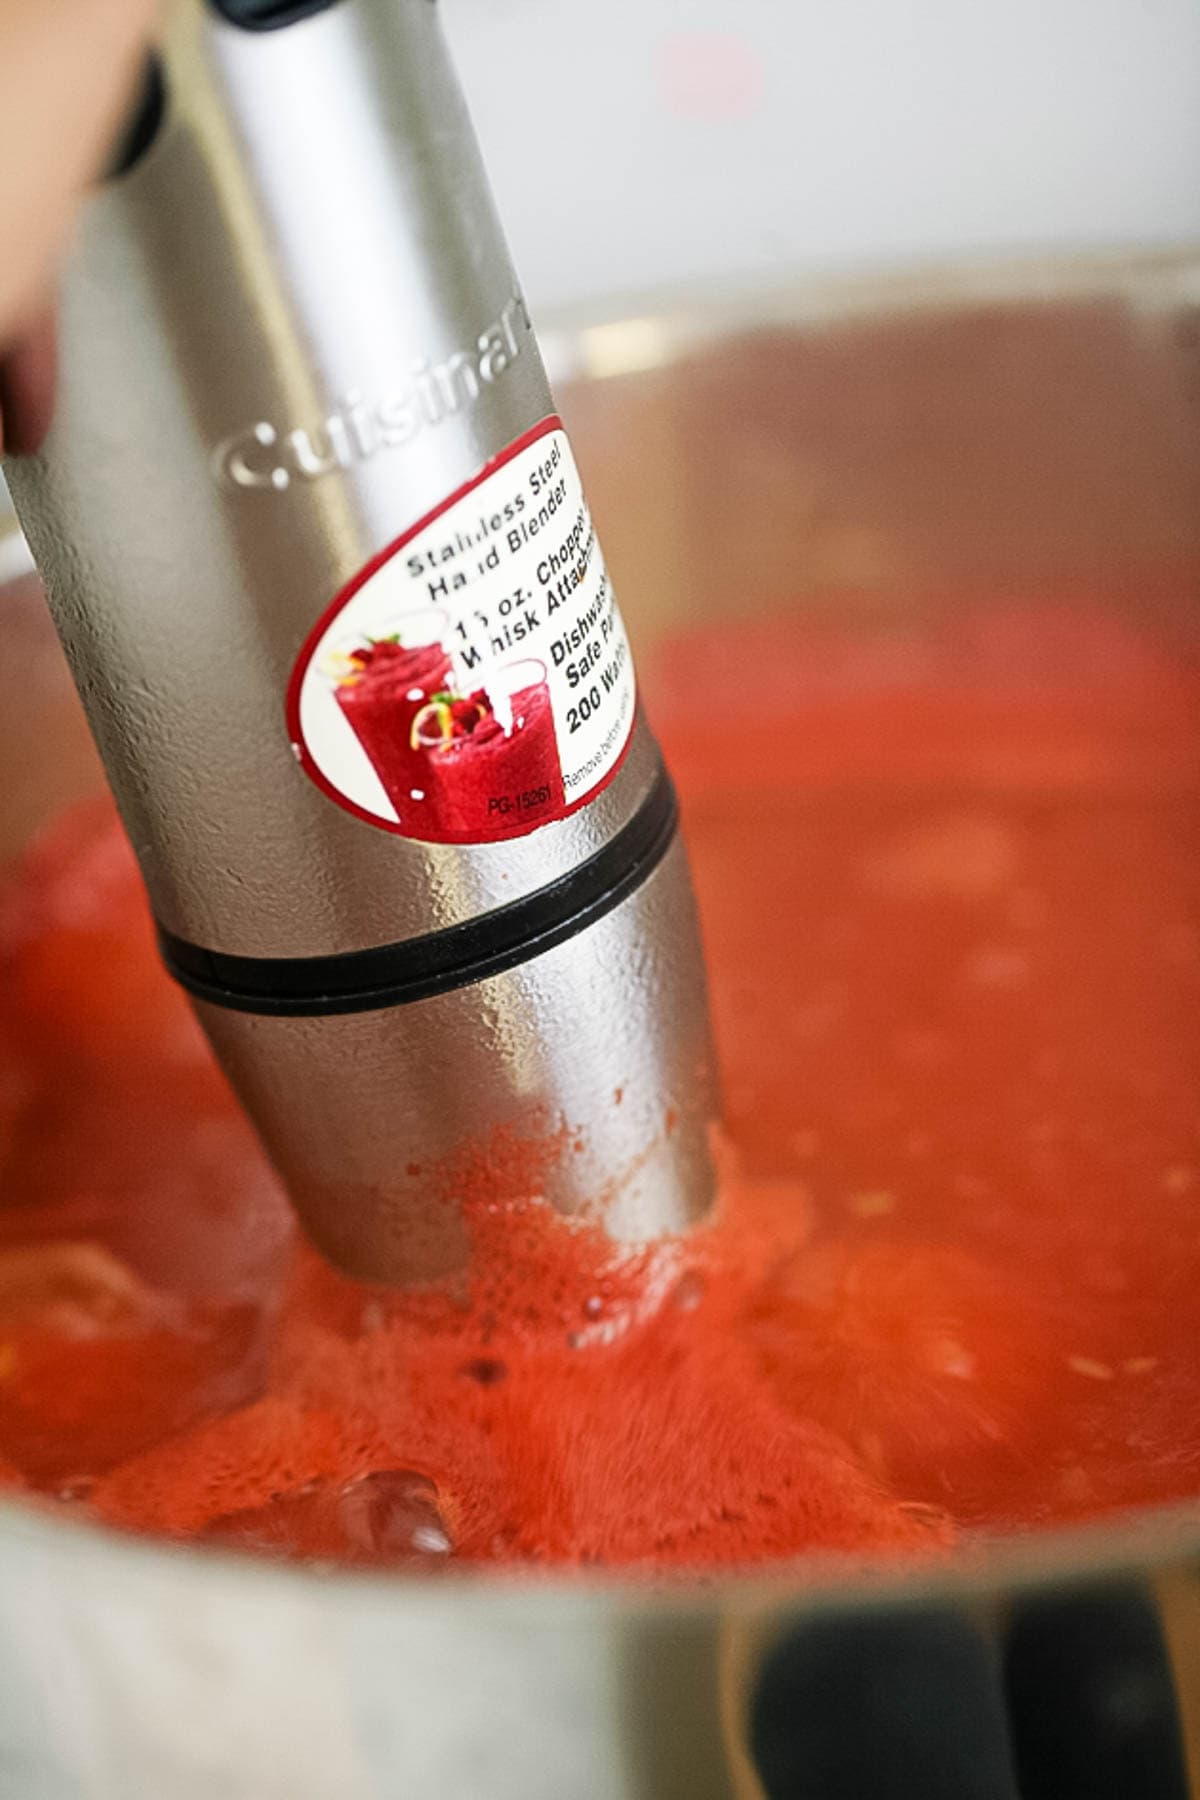 Blending the tomatoes into sauce.